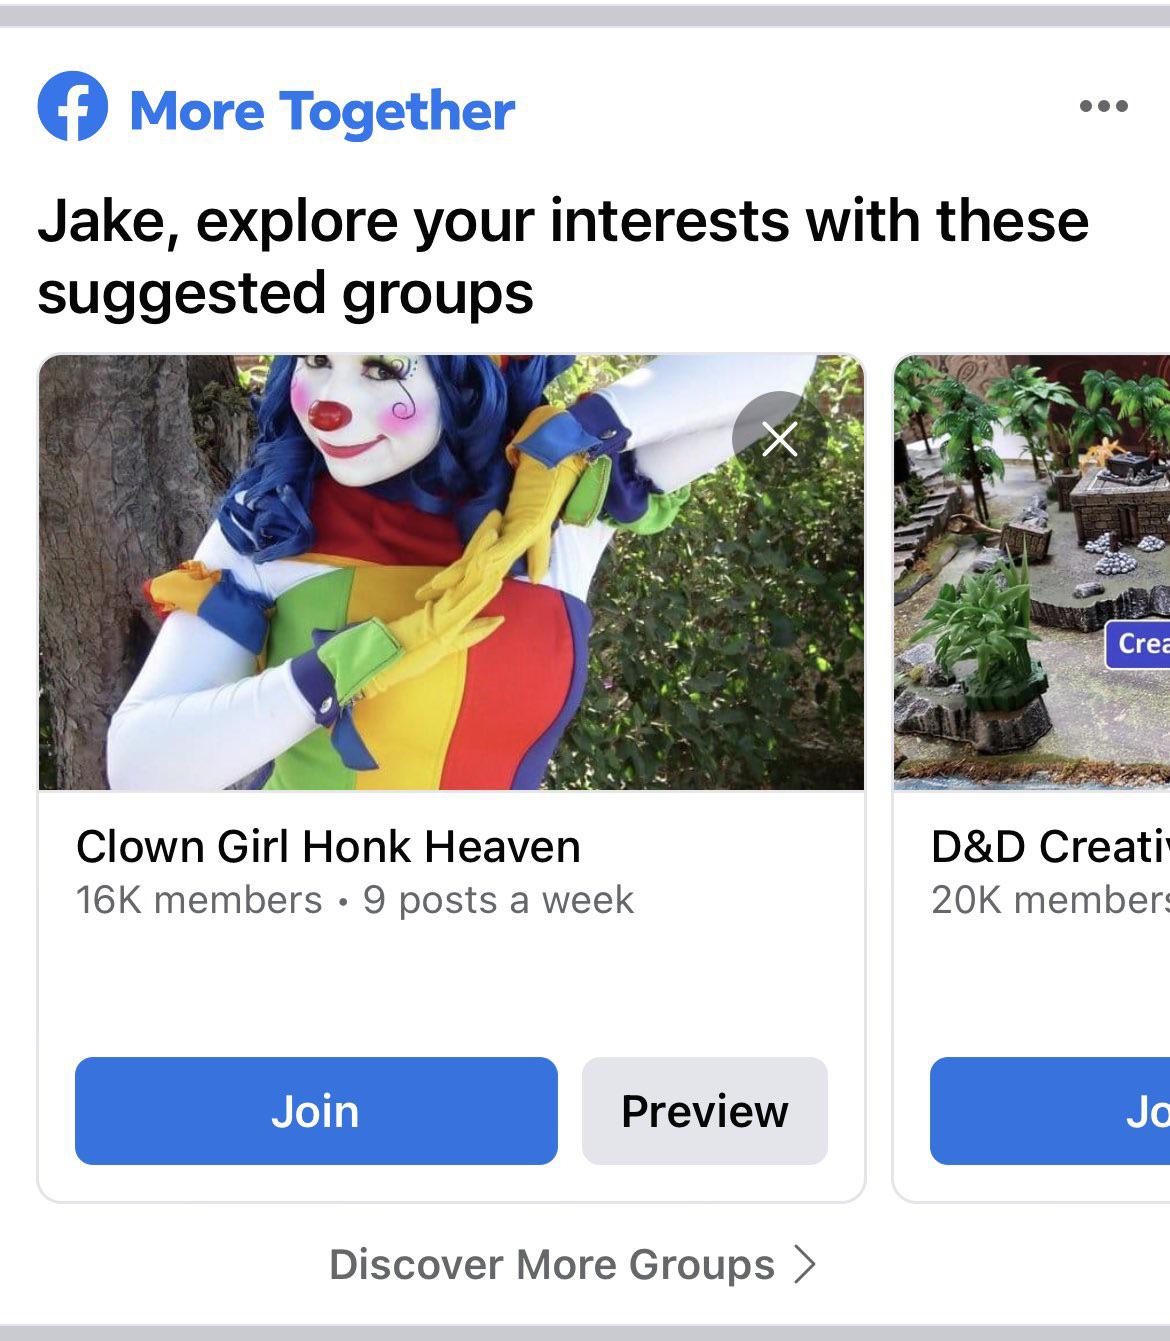 web page - f More Together Jake, explore your interests with these suggested groups Crea Clown Girl Honk Heaven 16K members 9 posts a week D&D Creati 20K member Join Preview Ja Discover More Groups >